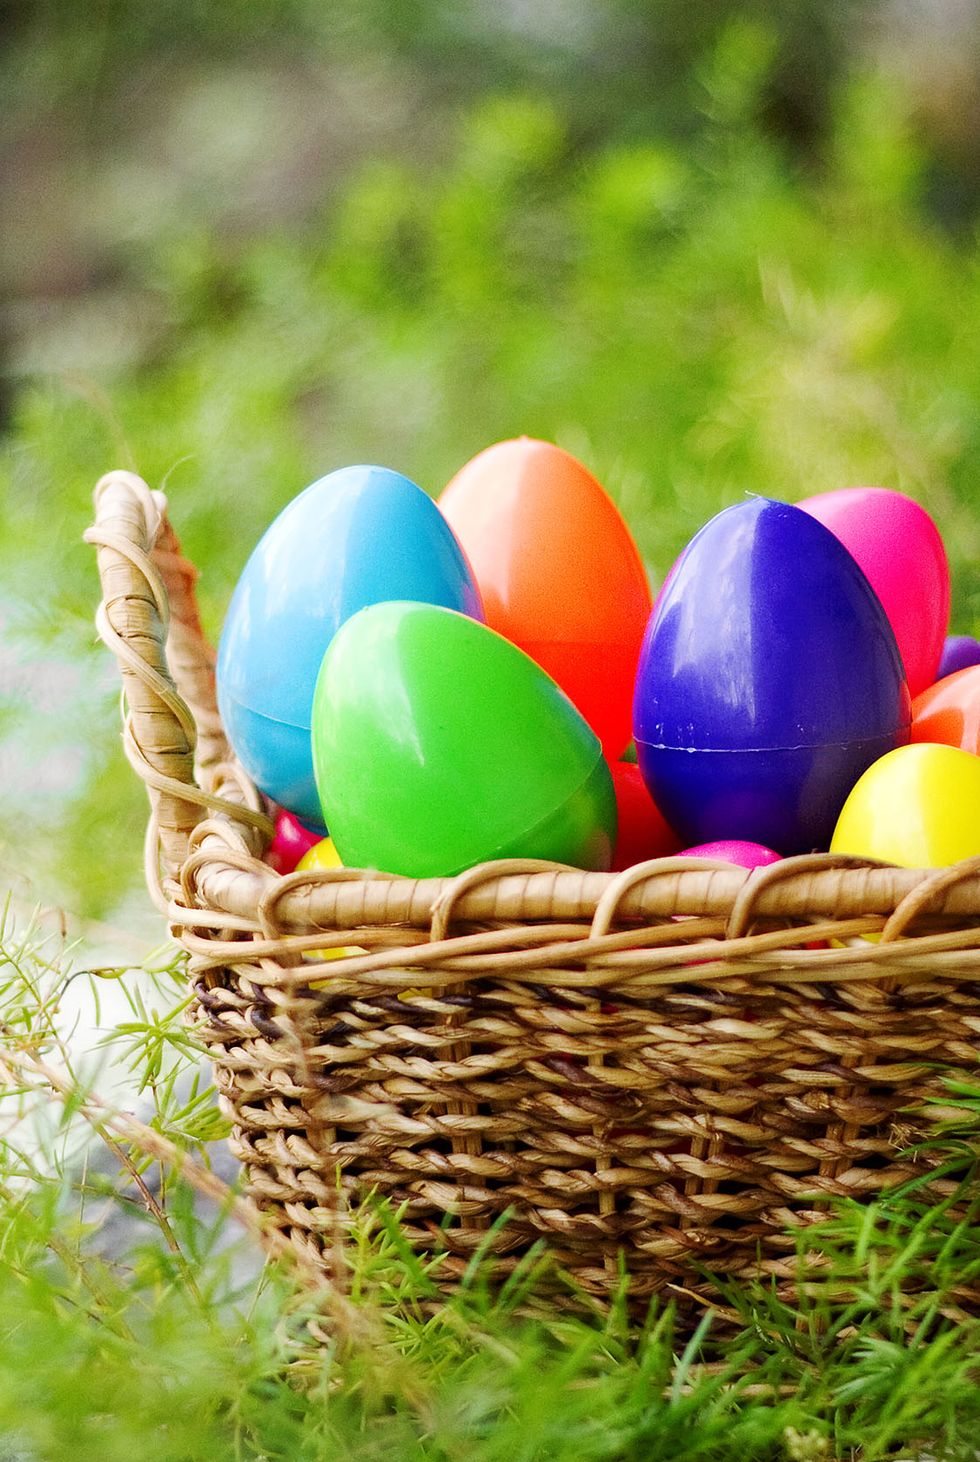 woven basket nestled in grass, brimming with colorful plastic eggs filled with recipes for an easter egg hunt idea for adults